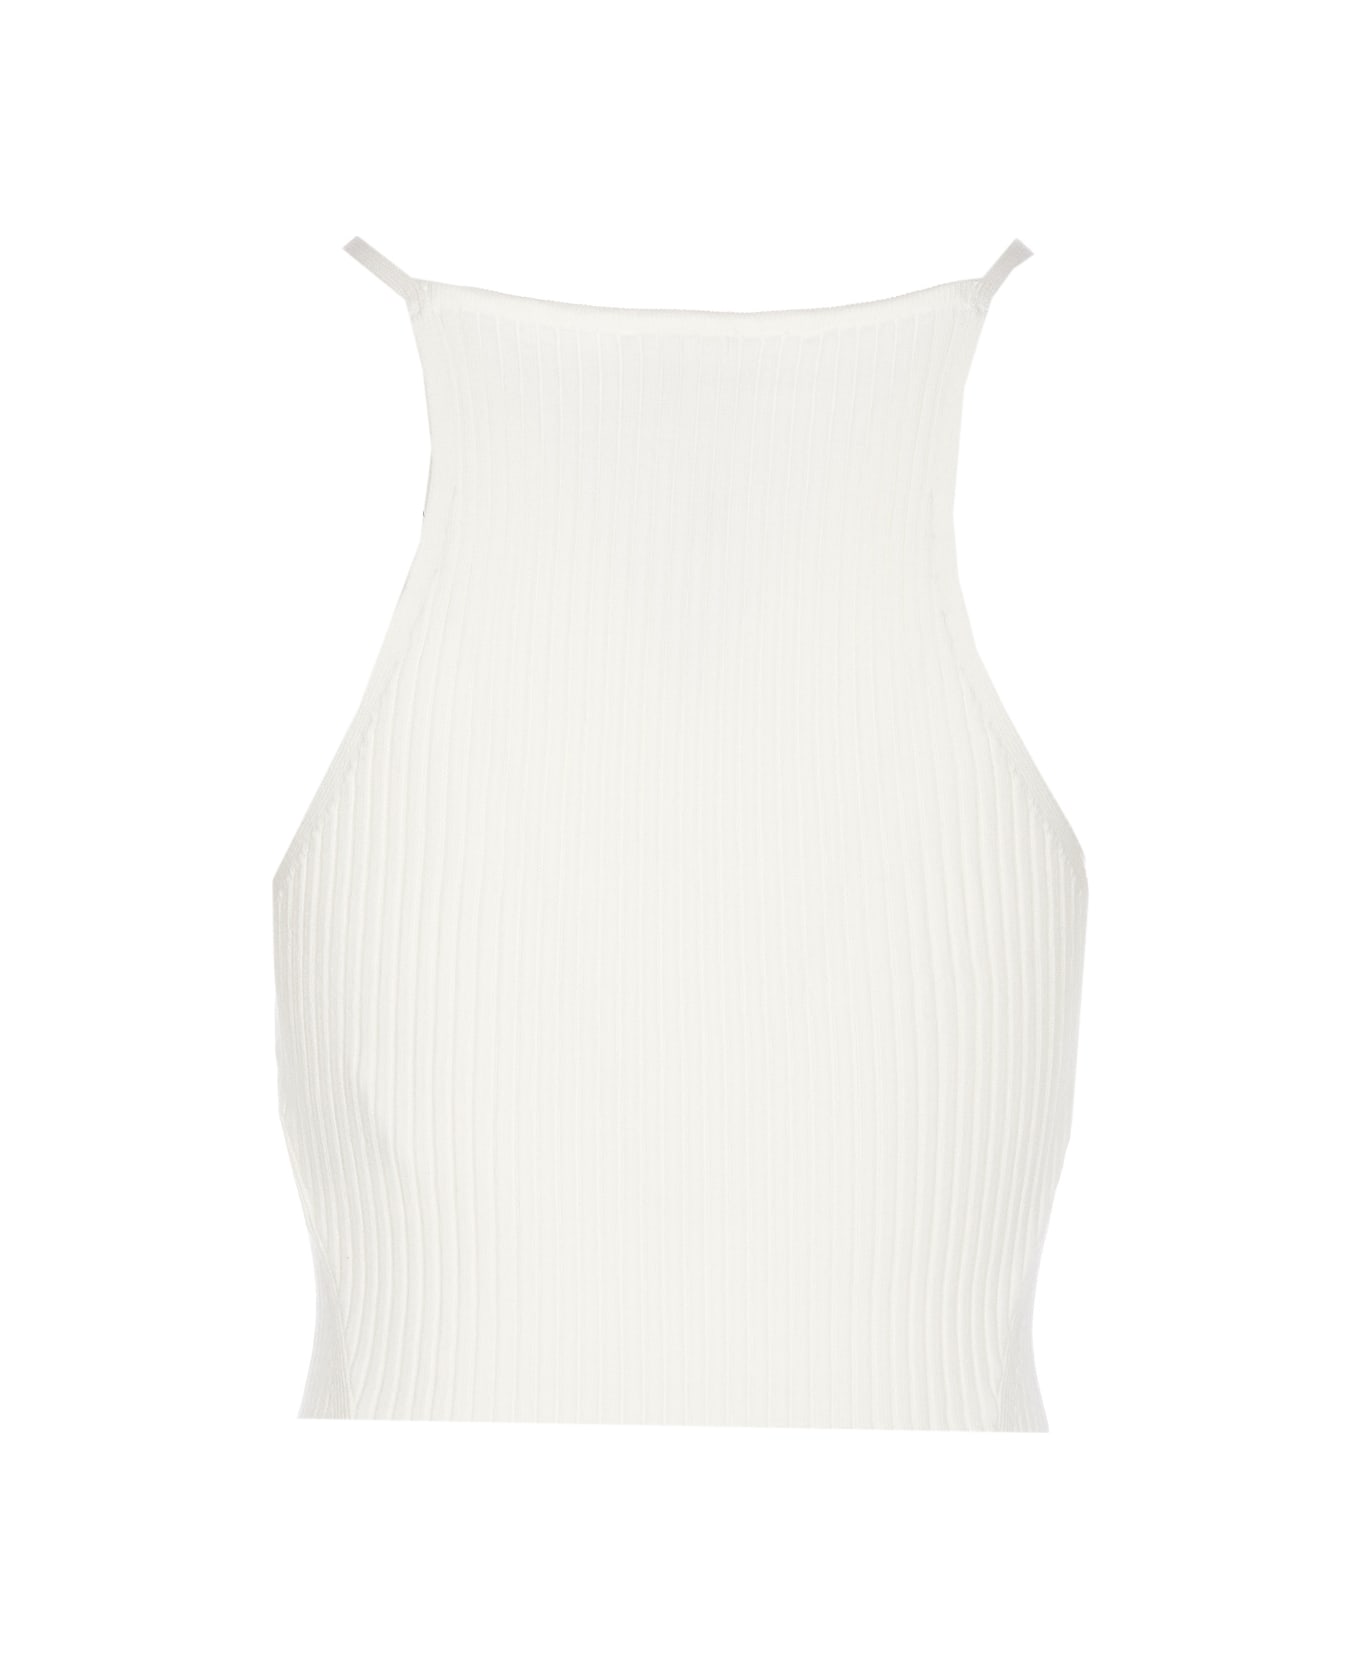 Courrèges Holistic Tank Top - White ボディスーツ